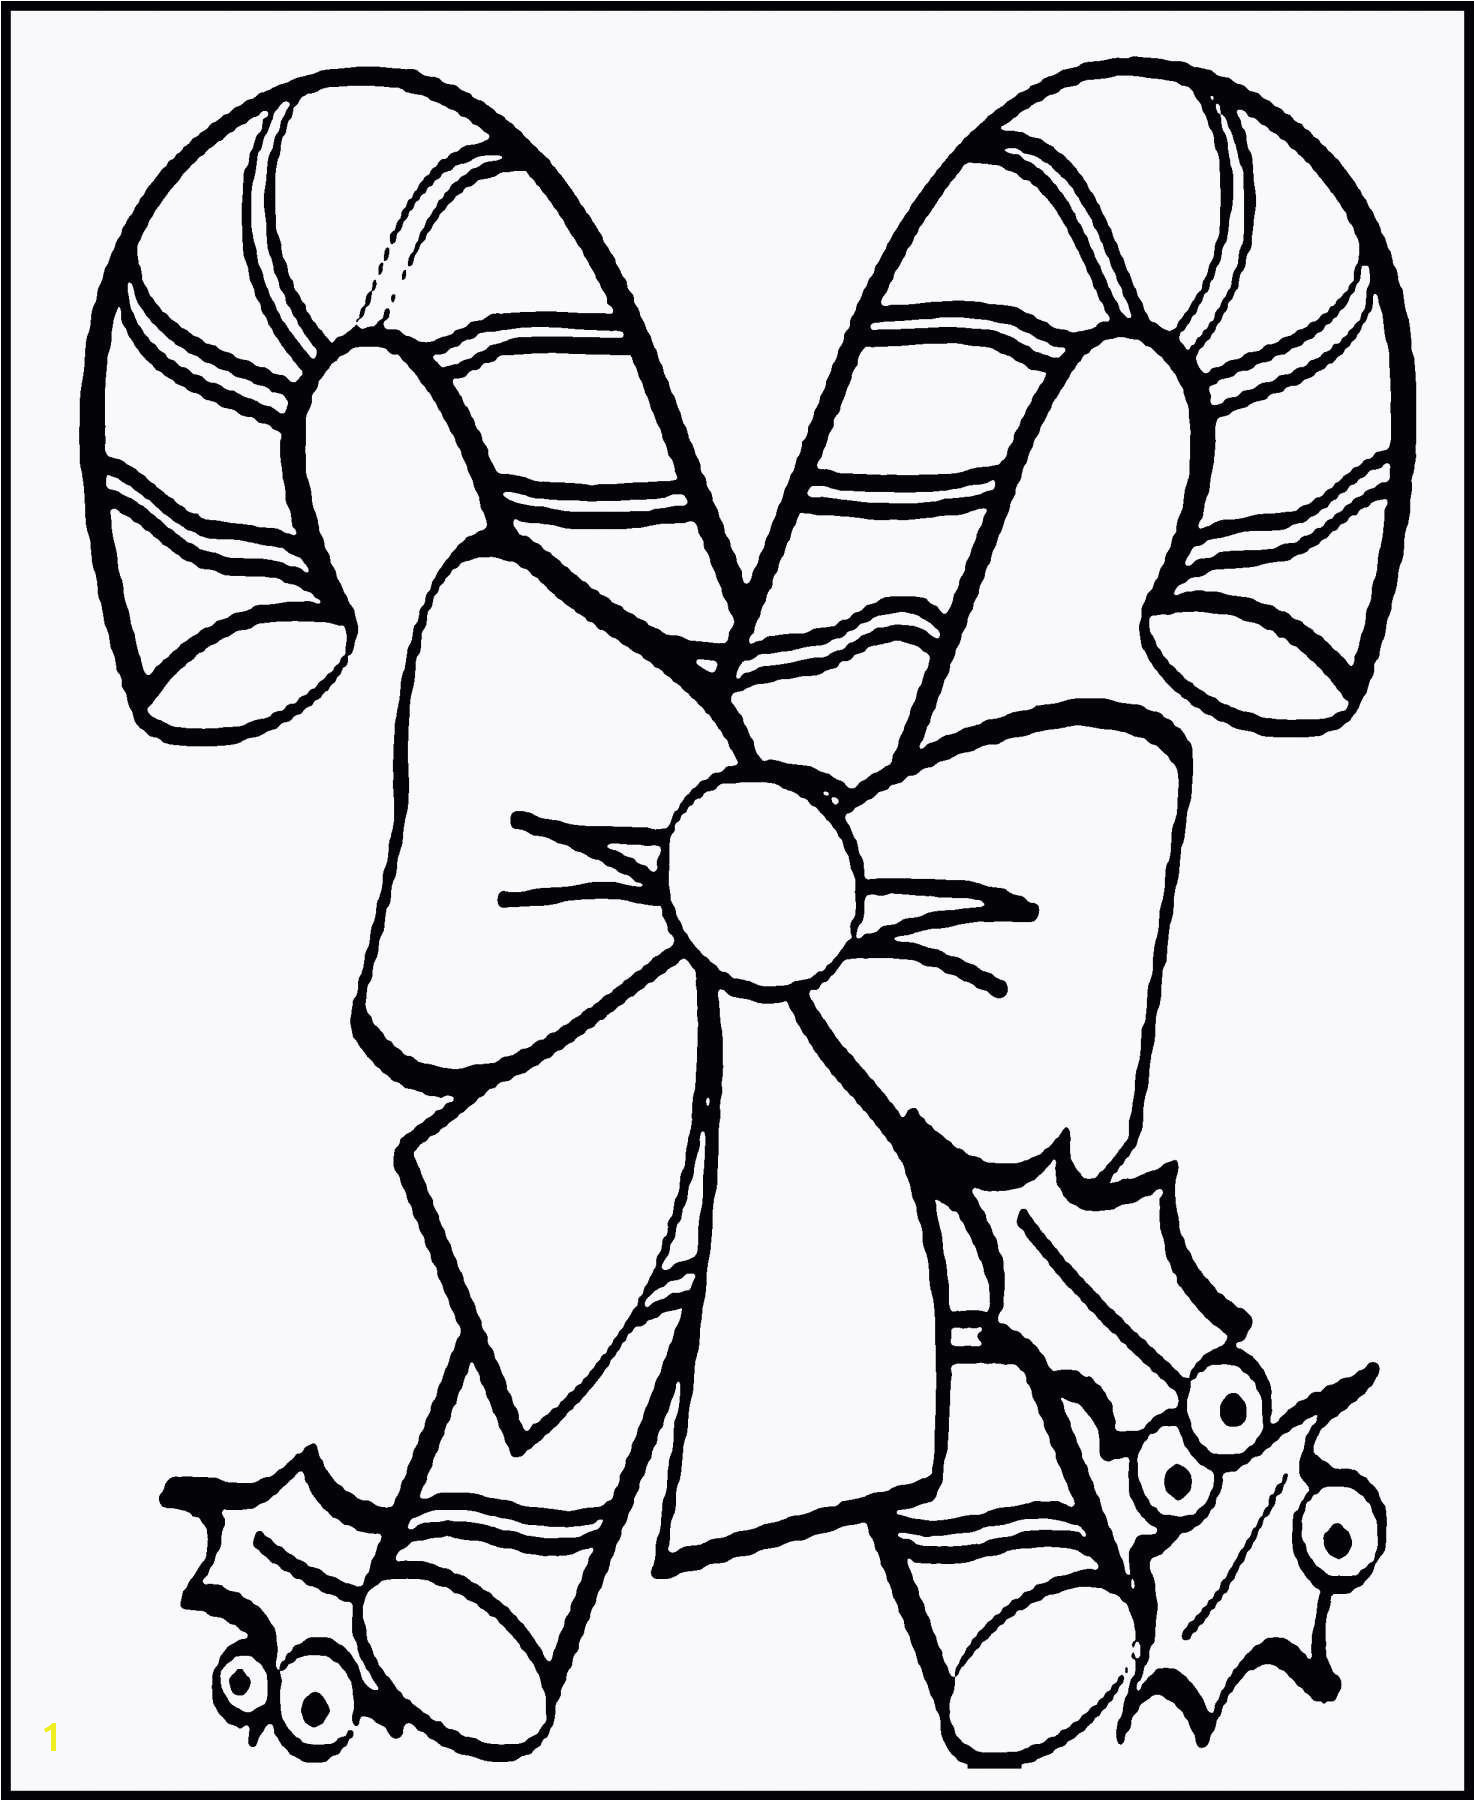 Kindergarten Coloring Pages Printable New Free Christmas Coloring Printables